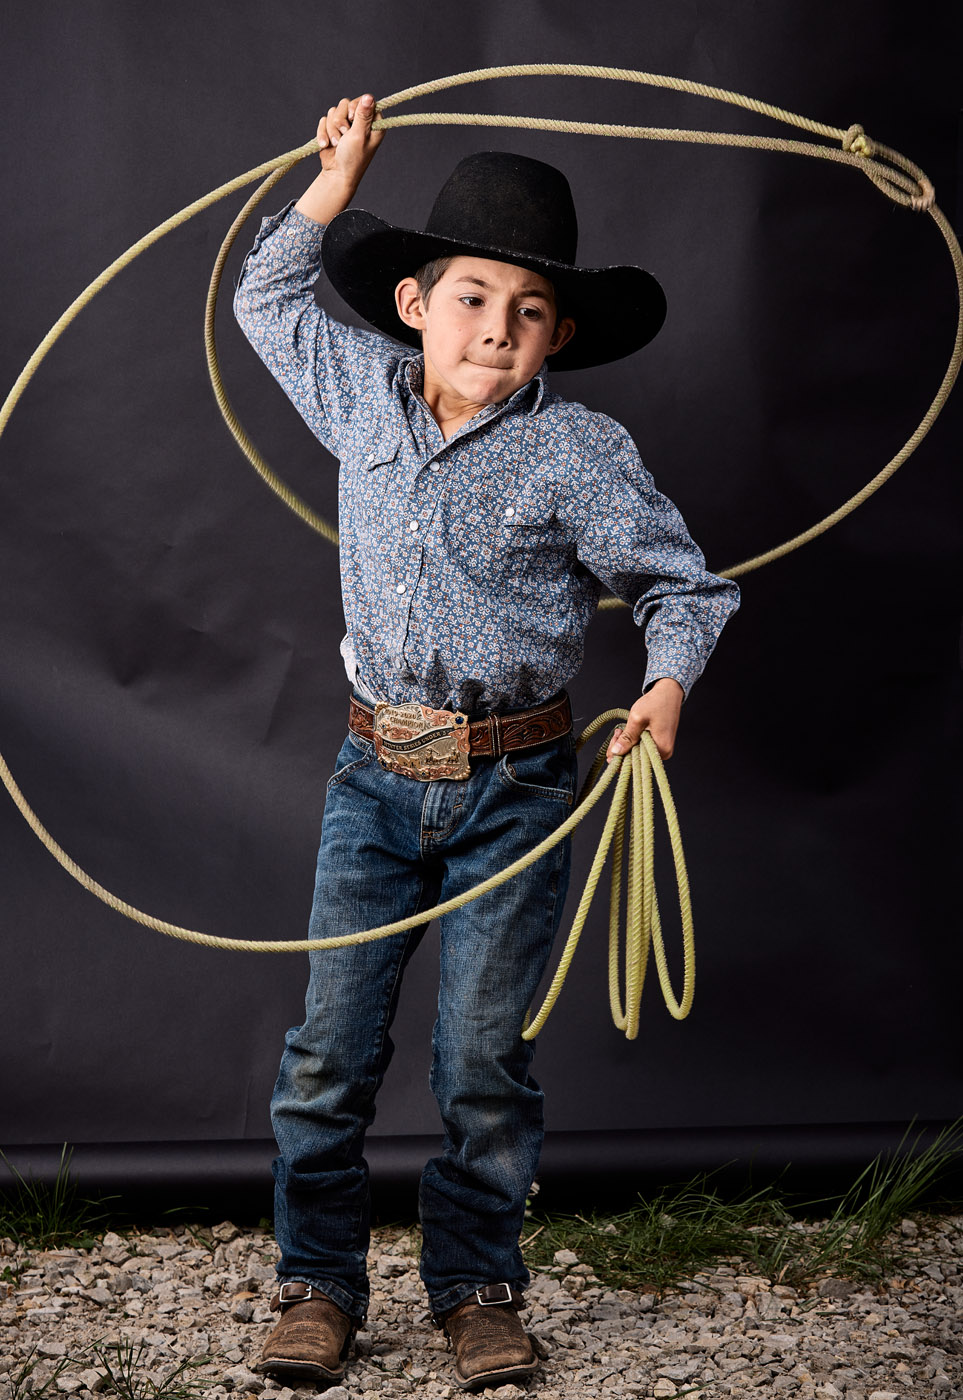 Latino boy roper at a rodeo | Childrens photography by Saverio Truglia